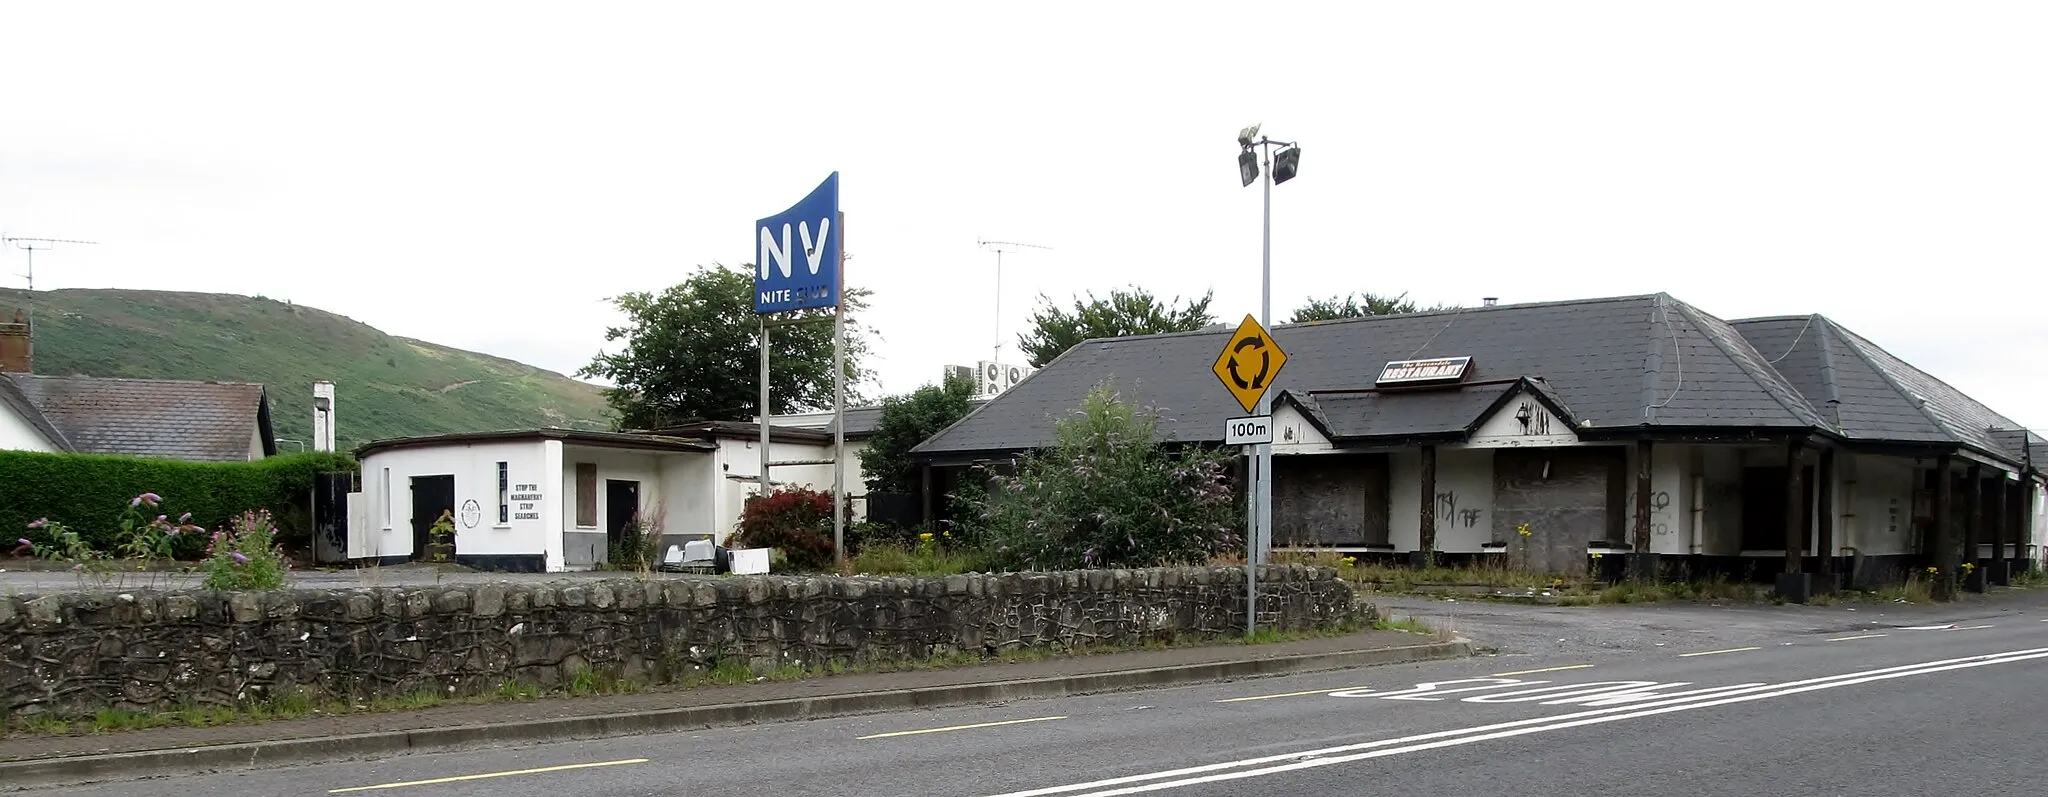 Photo showing: The disused Ravensdale Restaurant and NV Nite Club, Dromad